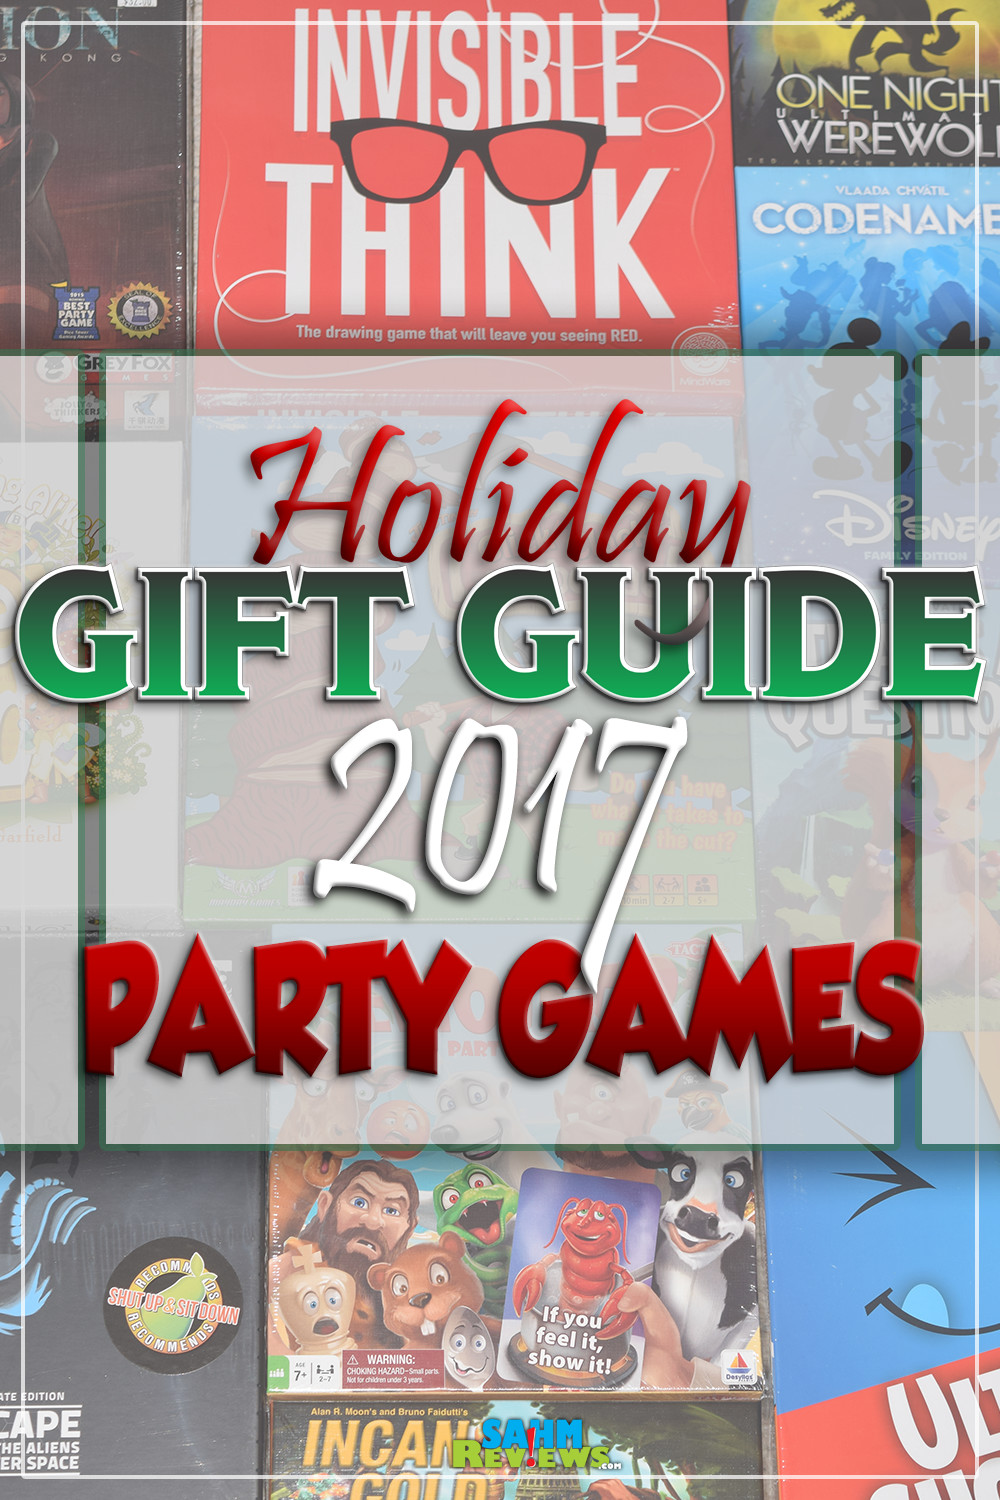 Finding good games for your next party can be difficult. Check out our 2017 Party Games Gift Guide for a number of games that support large groups! - SahmReviews.com